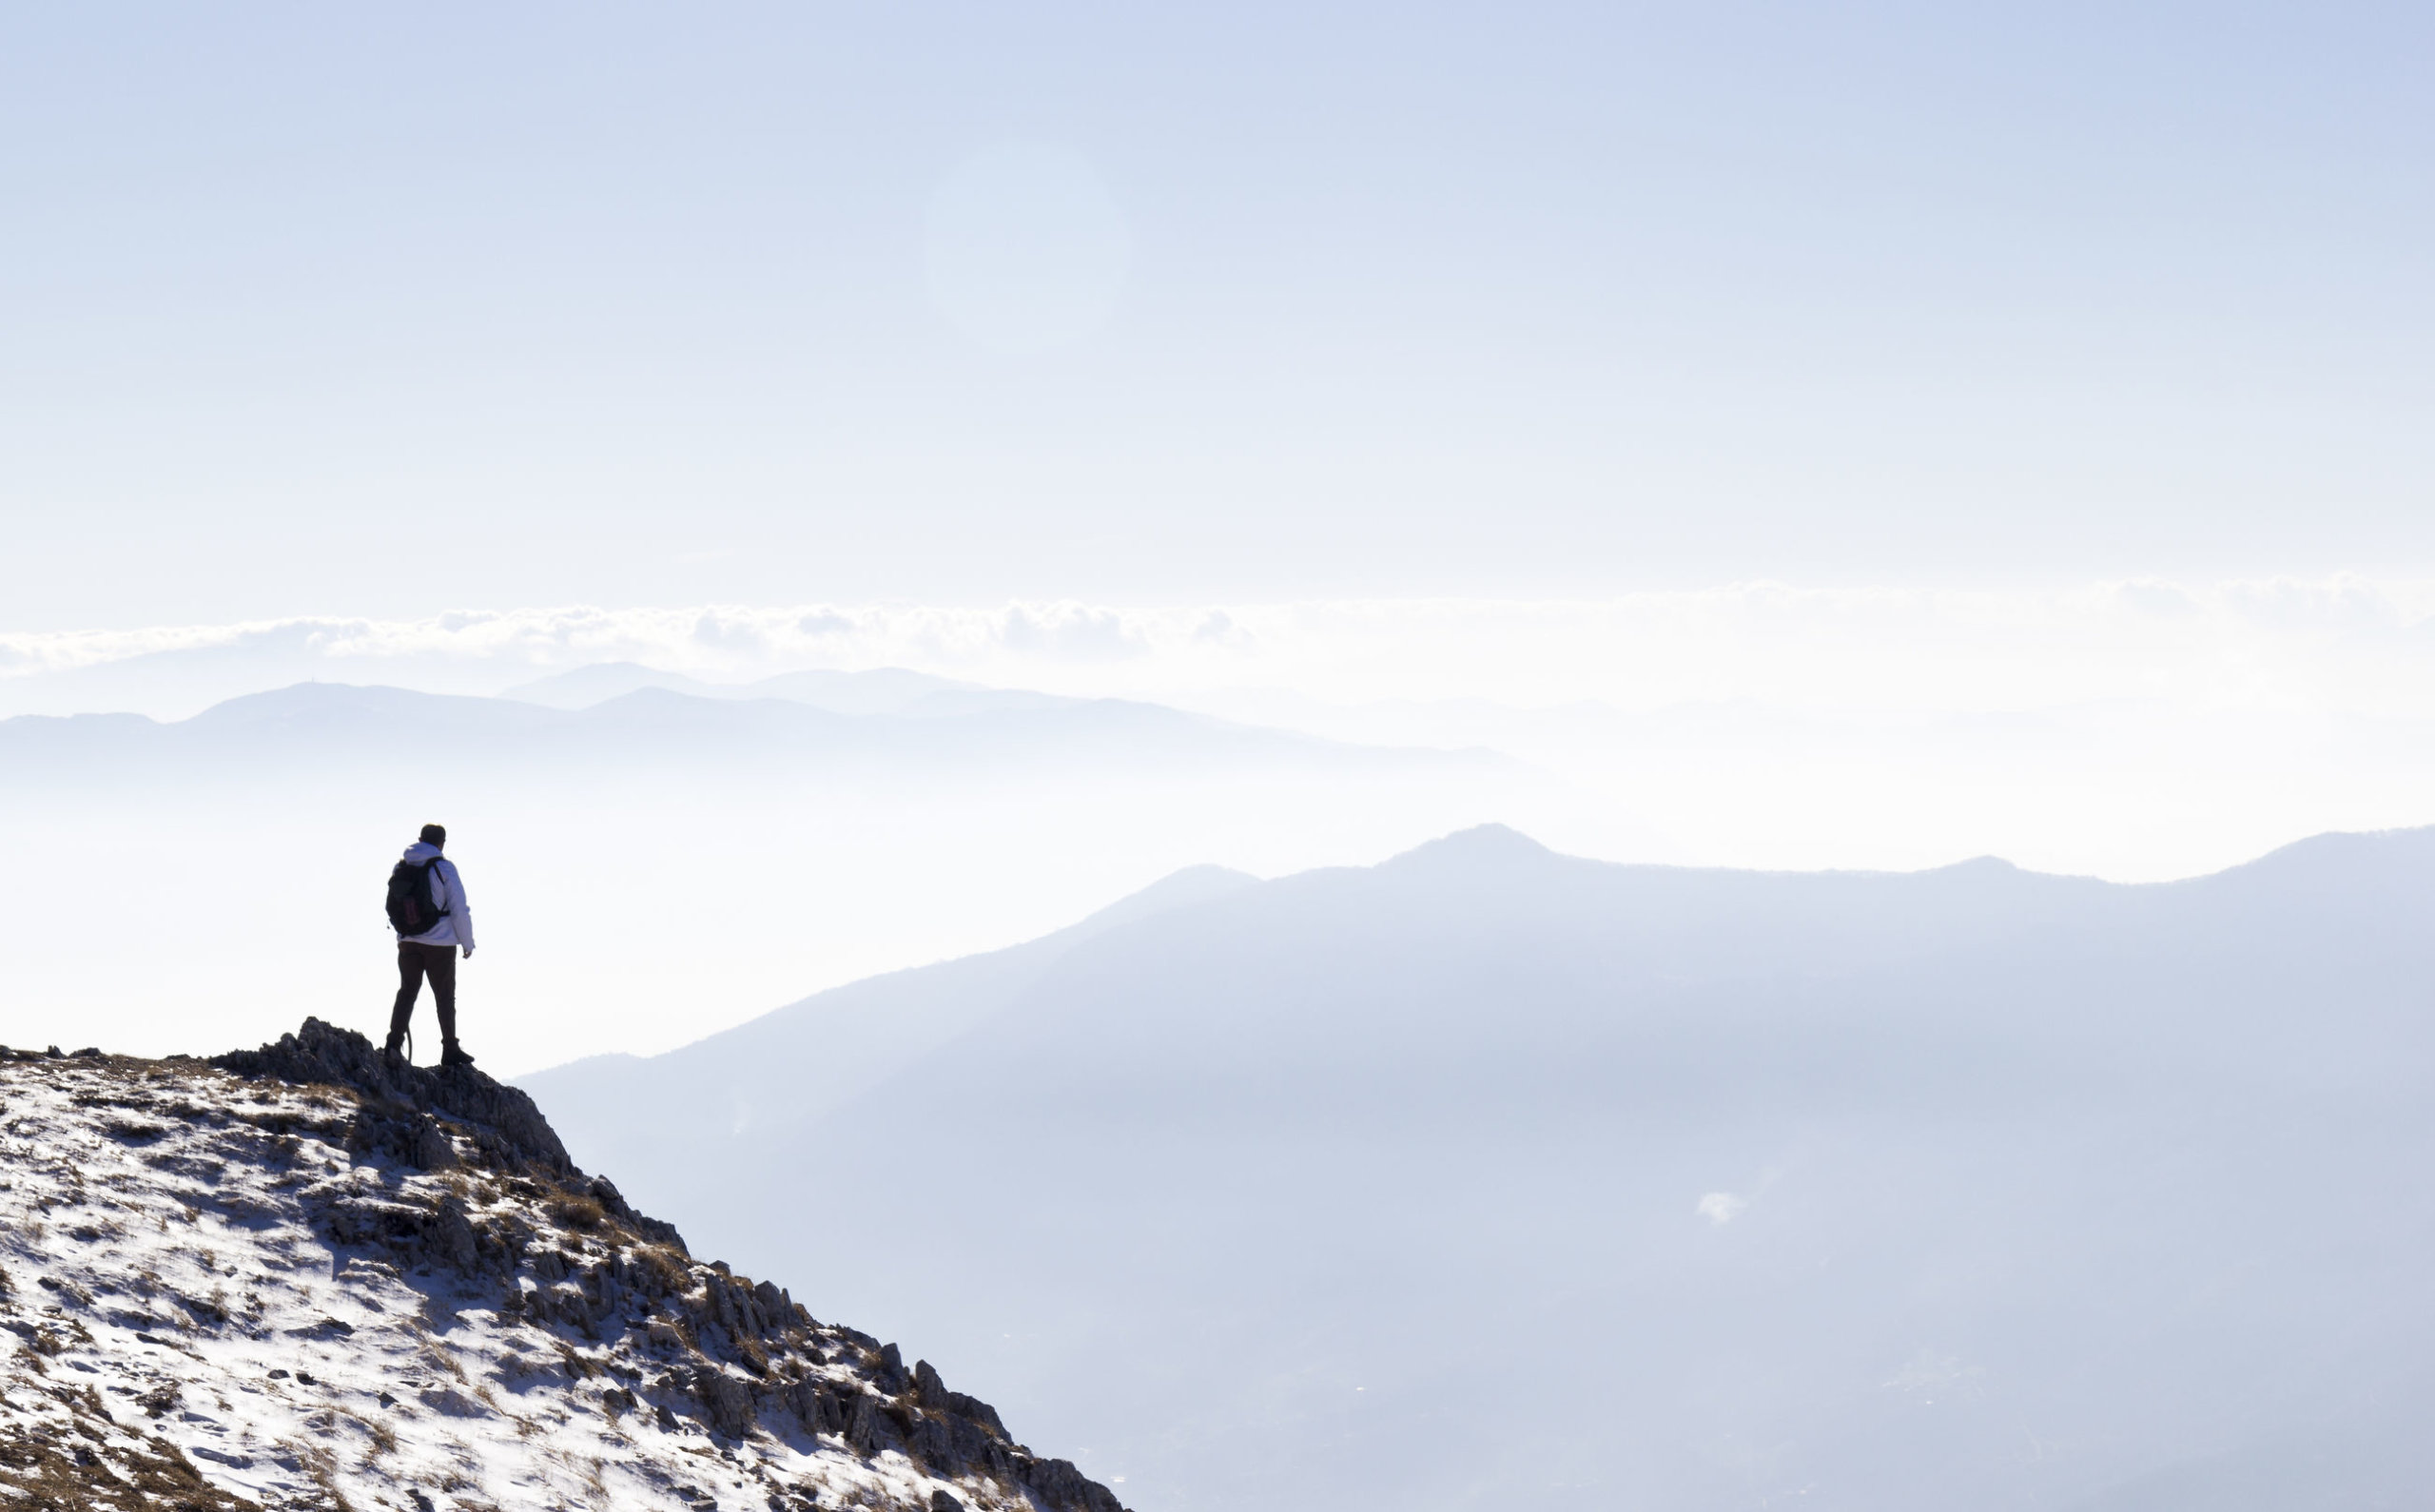 Hiker on the summit of a mountain and snow